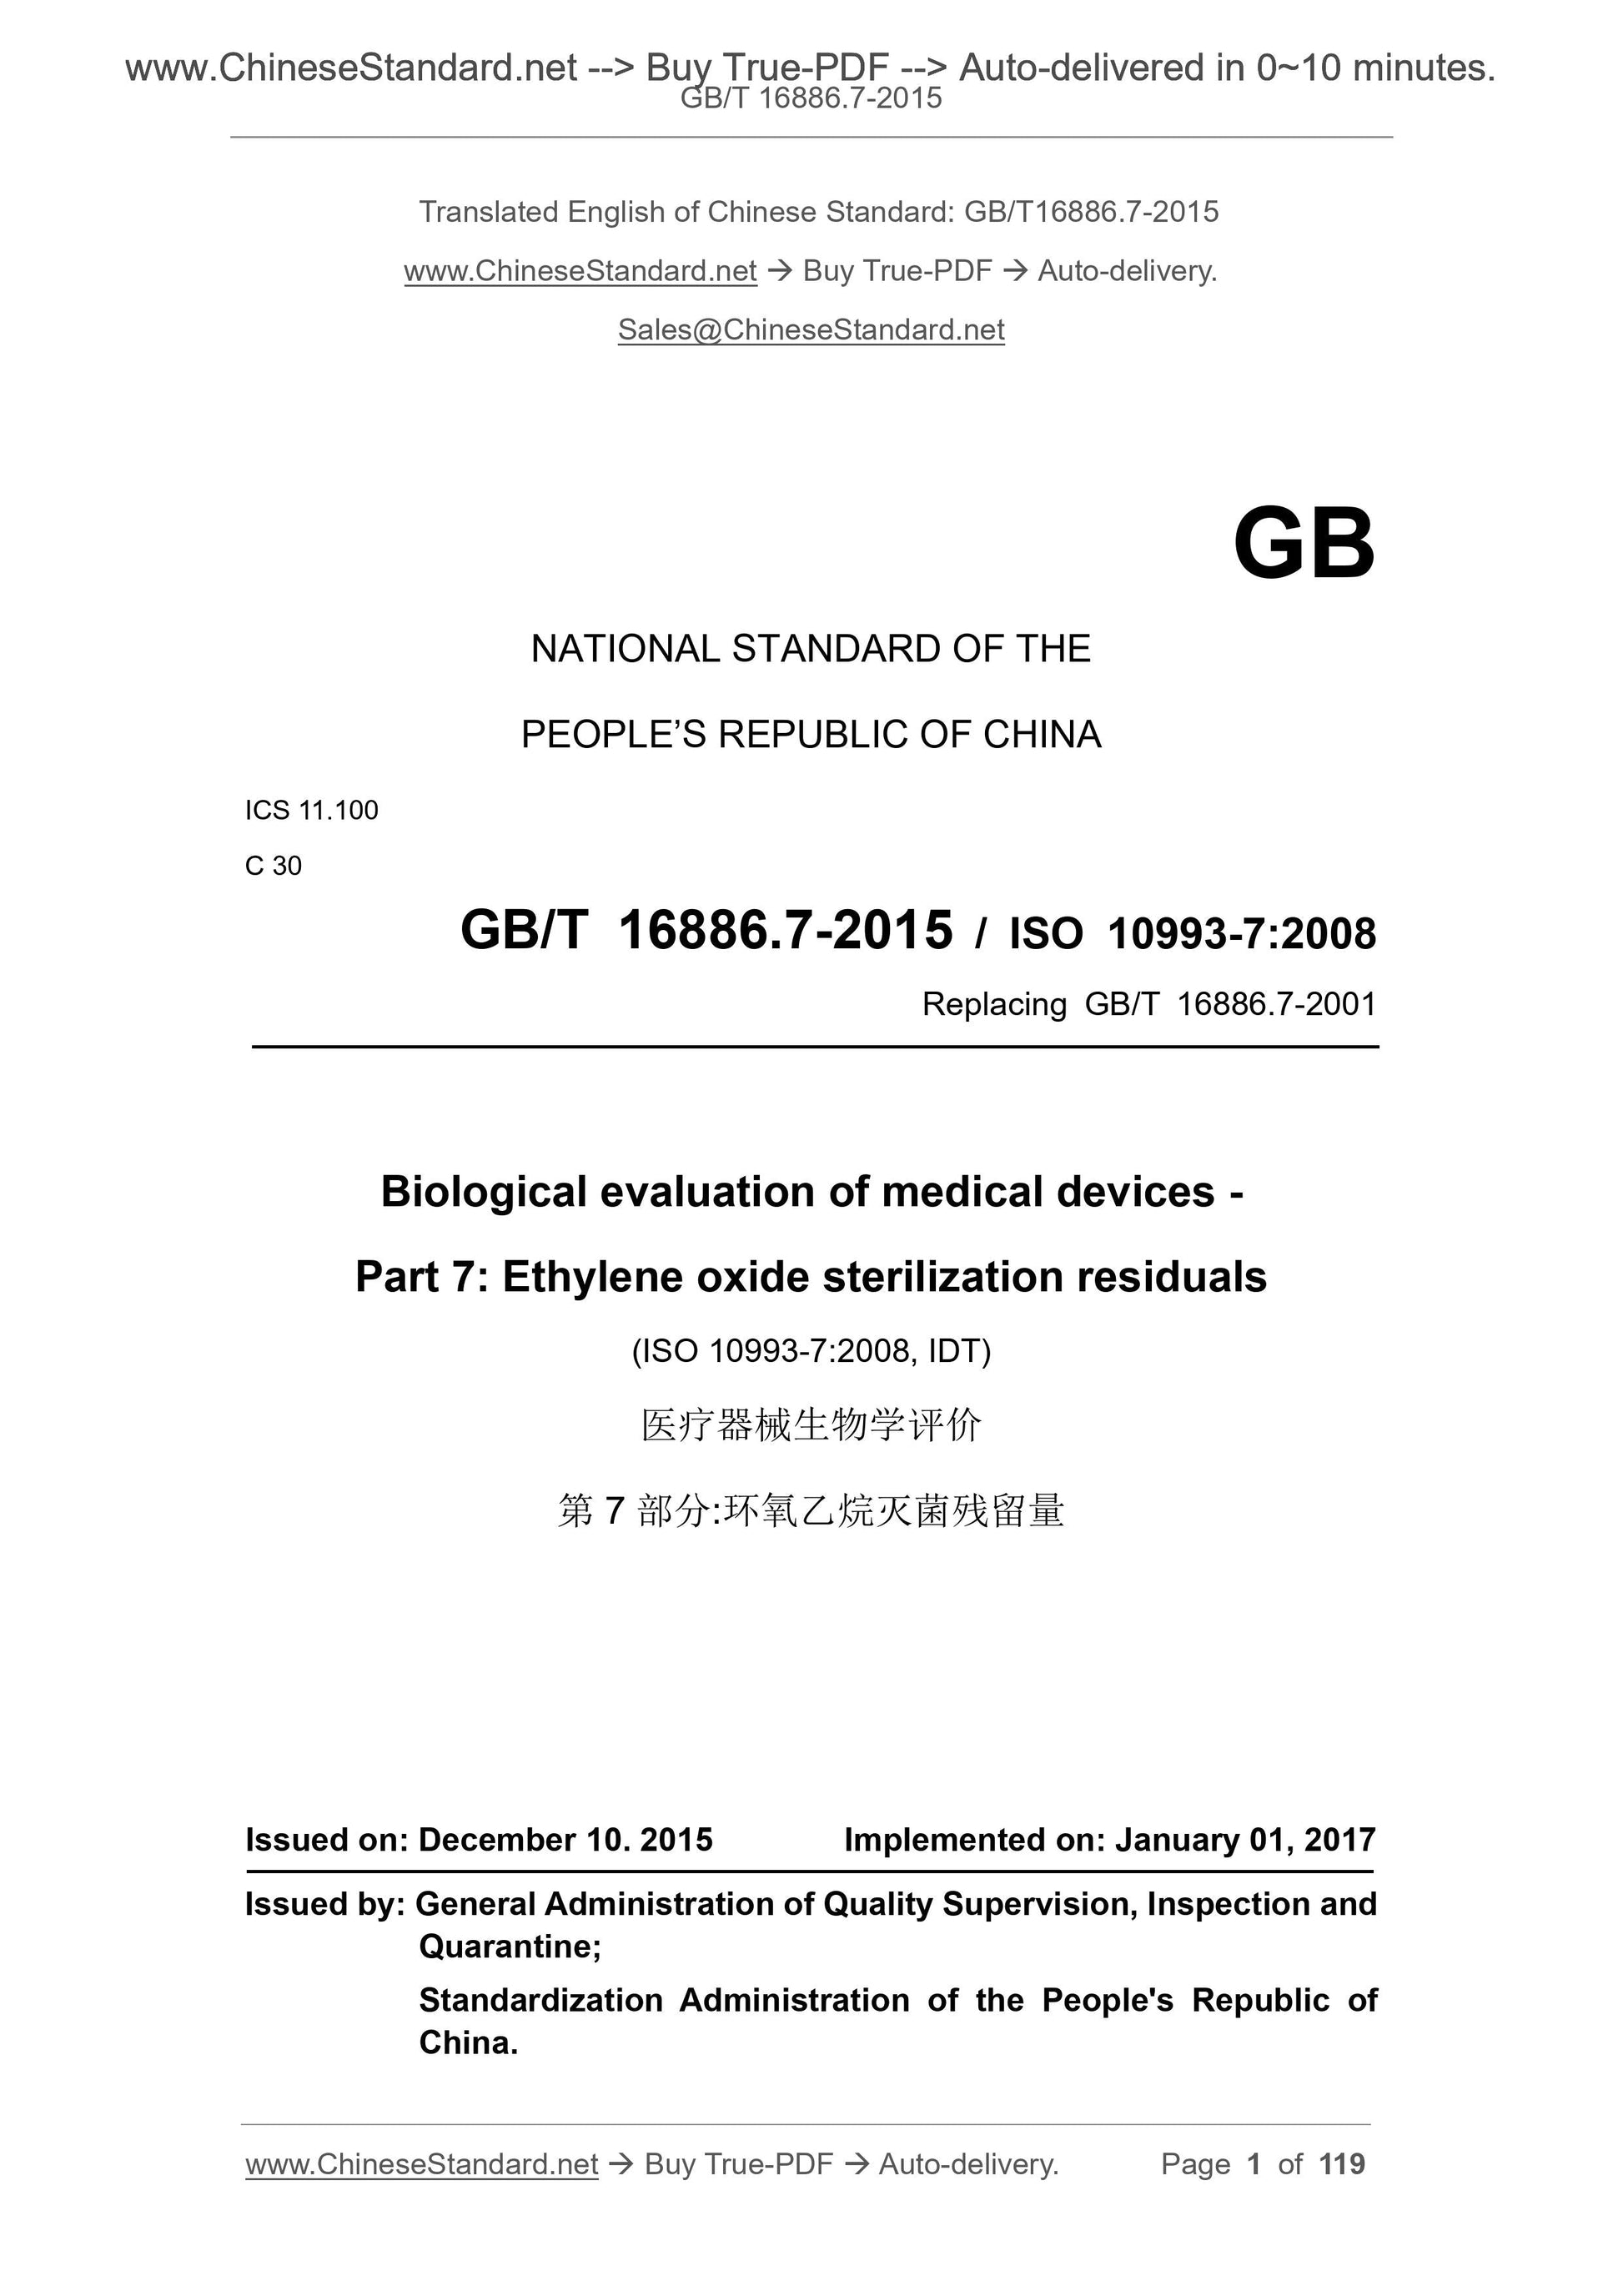 GB/T 16886.7-2015 Page 1